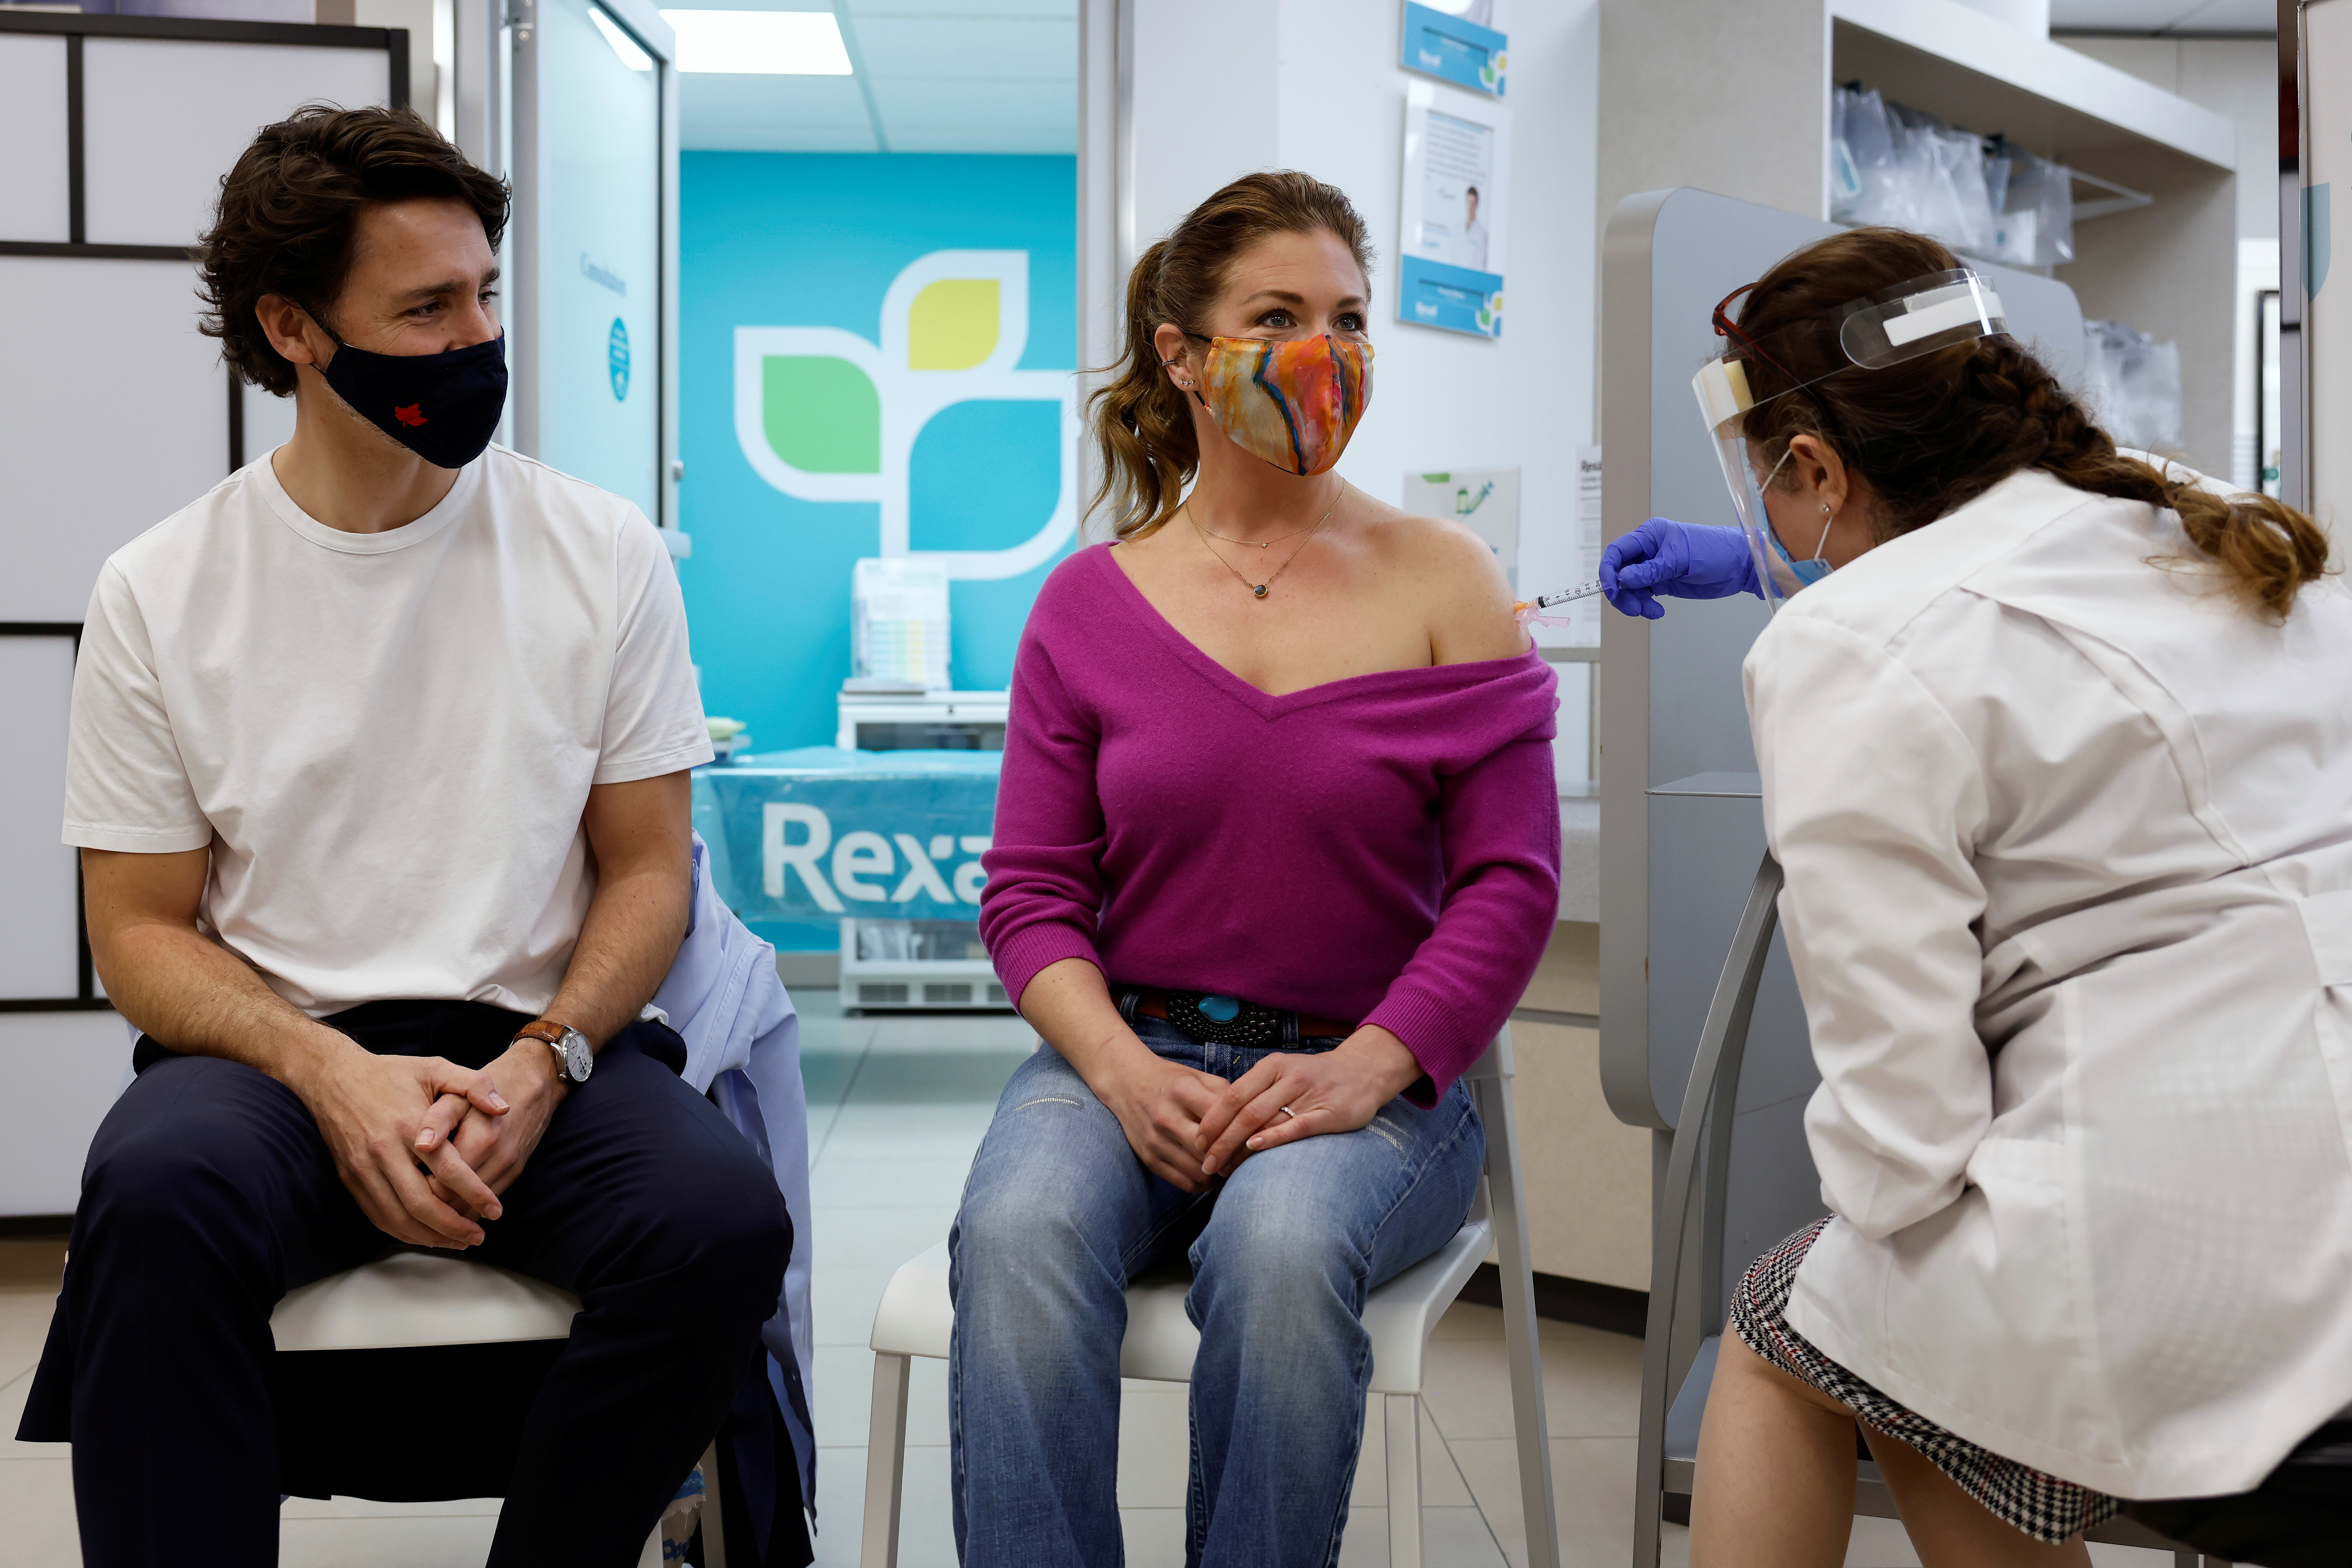 Canada's Prime Minister Justin Trudeau watches as his wife Sophie Gregoire is inoculated with AstraZeneca's vaccine against coronavirus disease (COVID-19) at a pharmacy in Ottawa, Ontario, Canada April 23, 2021.   REUTERS/Blair Gable